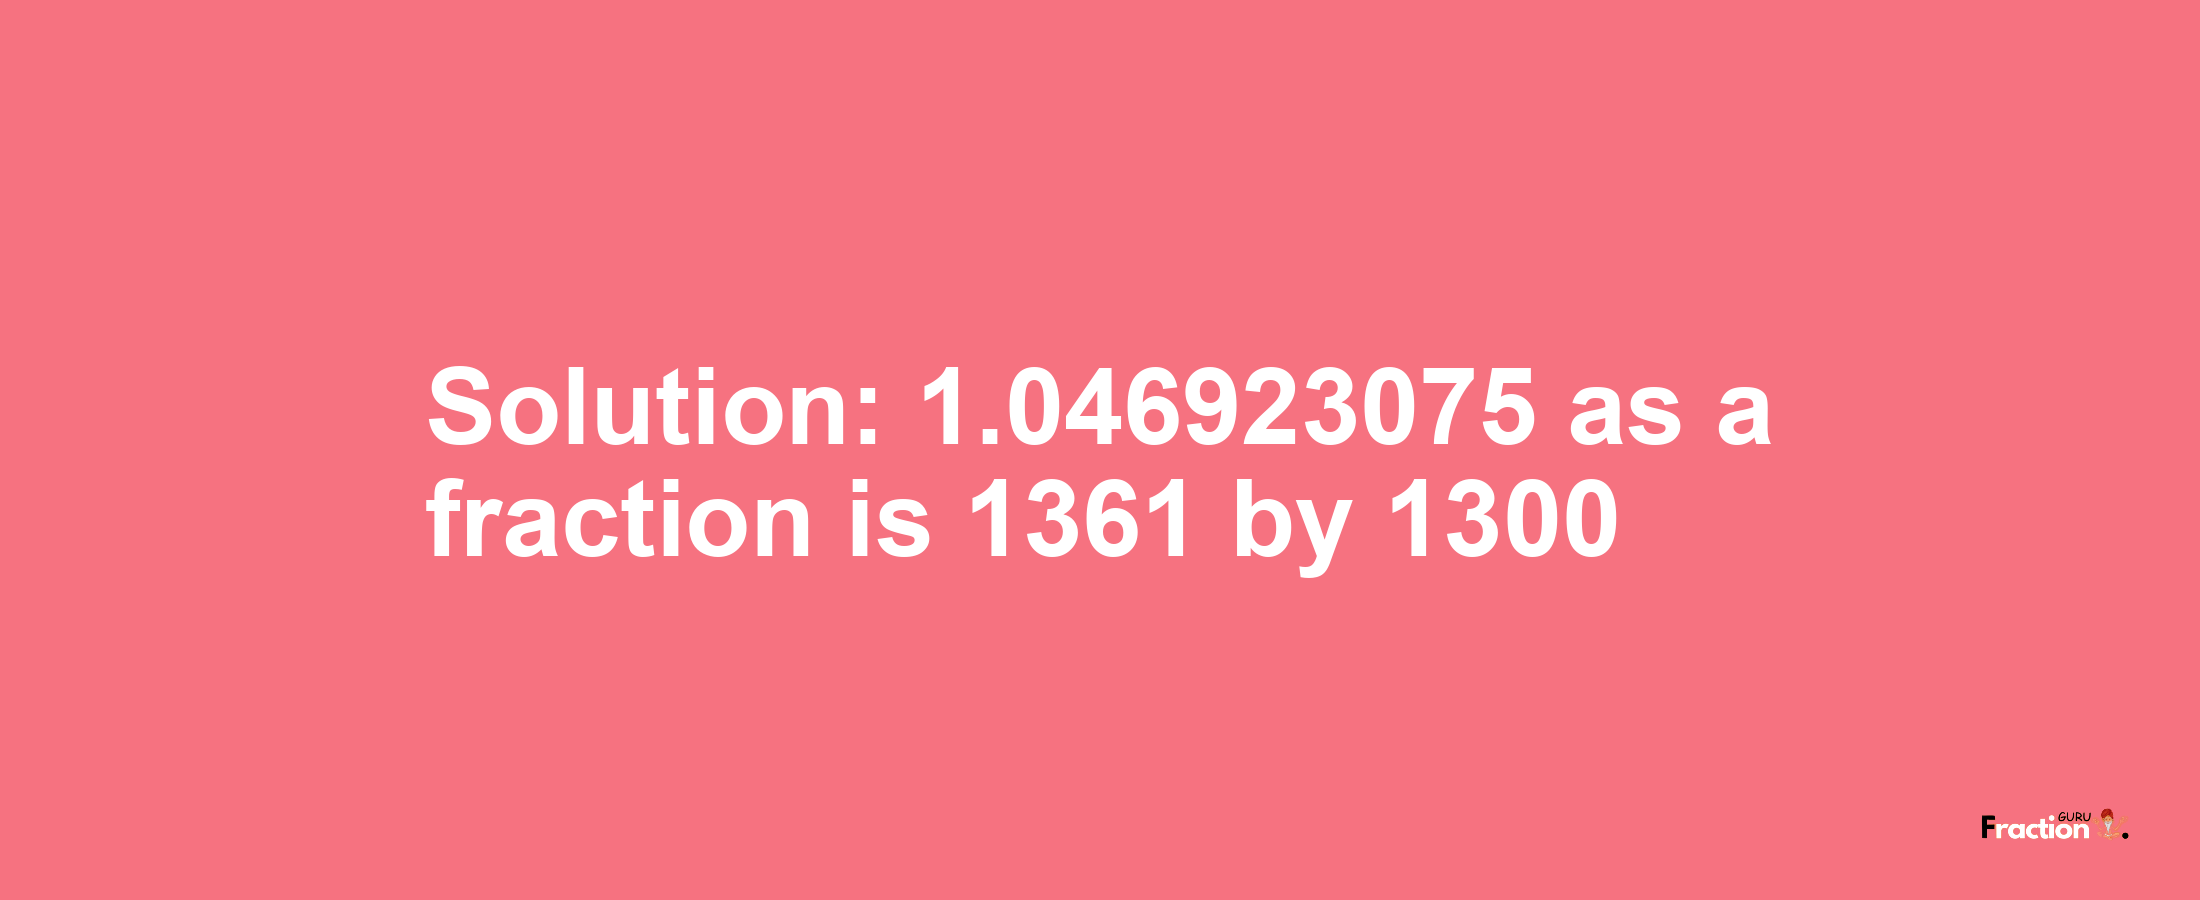 Solution:1.046923075 as a fraction is 1361/1300